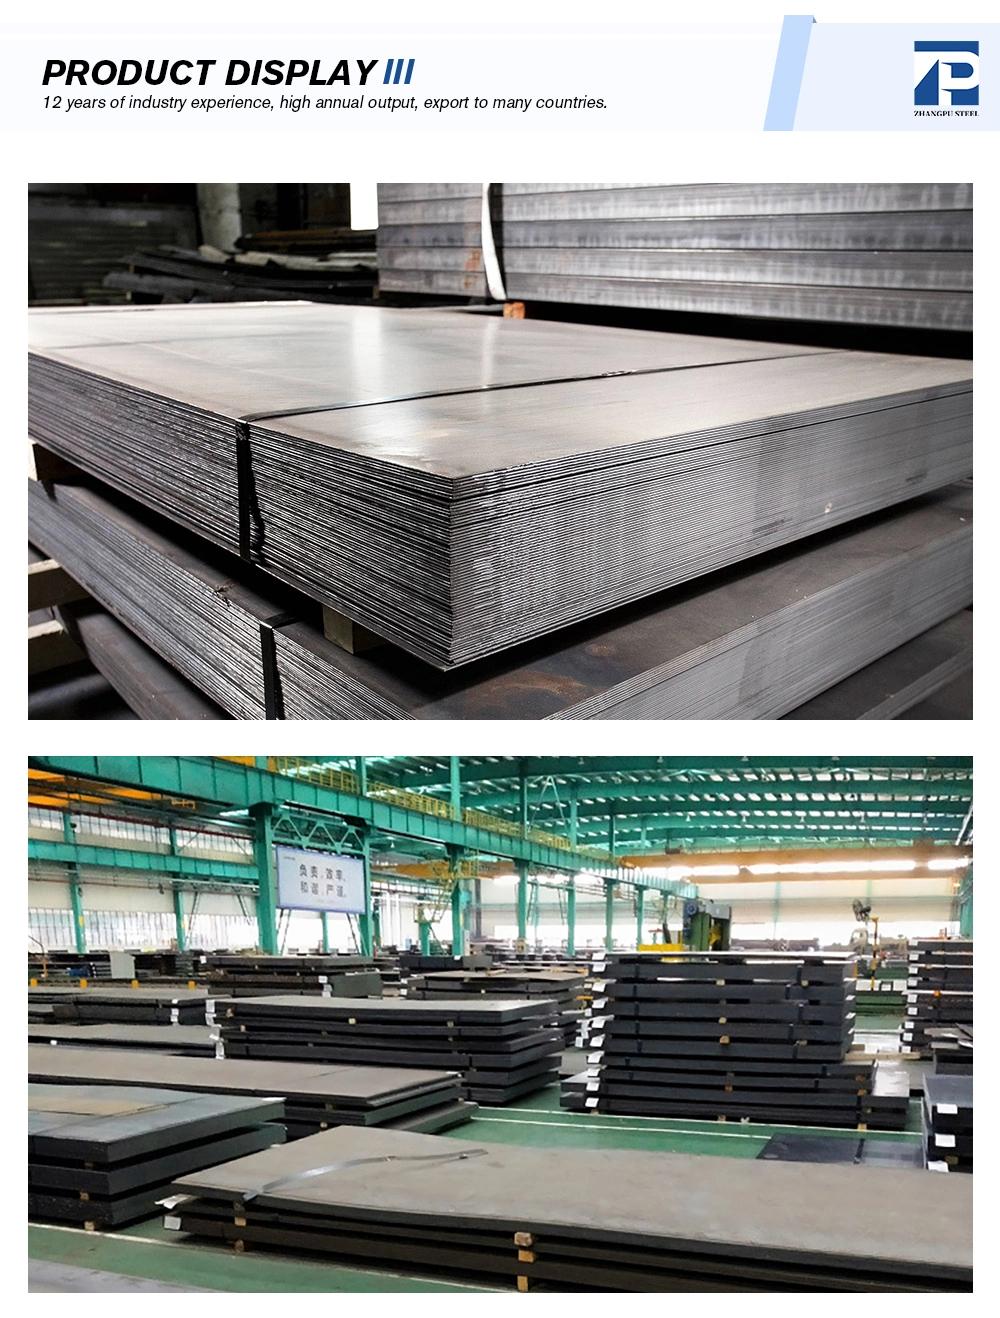 High Quality 440c Sheet 4X4 Metal 4X8 Price AISI 1010 Hot Rolled Carbon Steel Plate Sheet